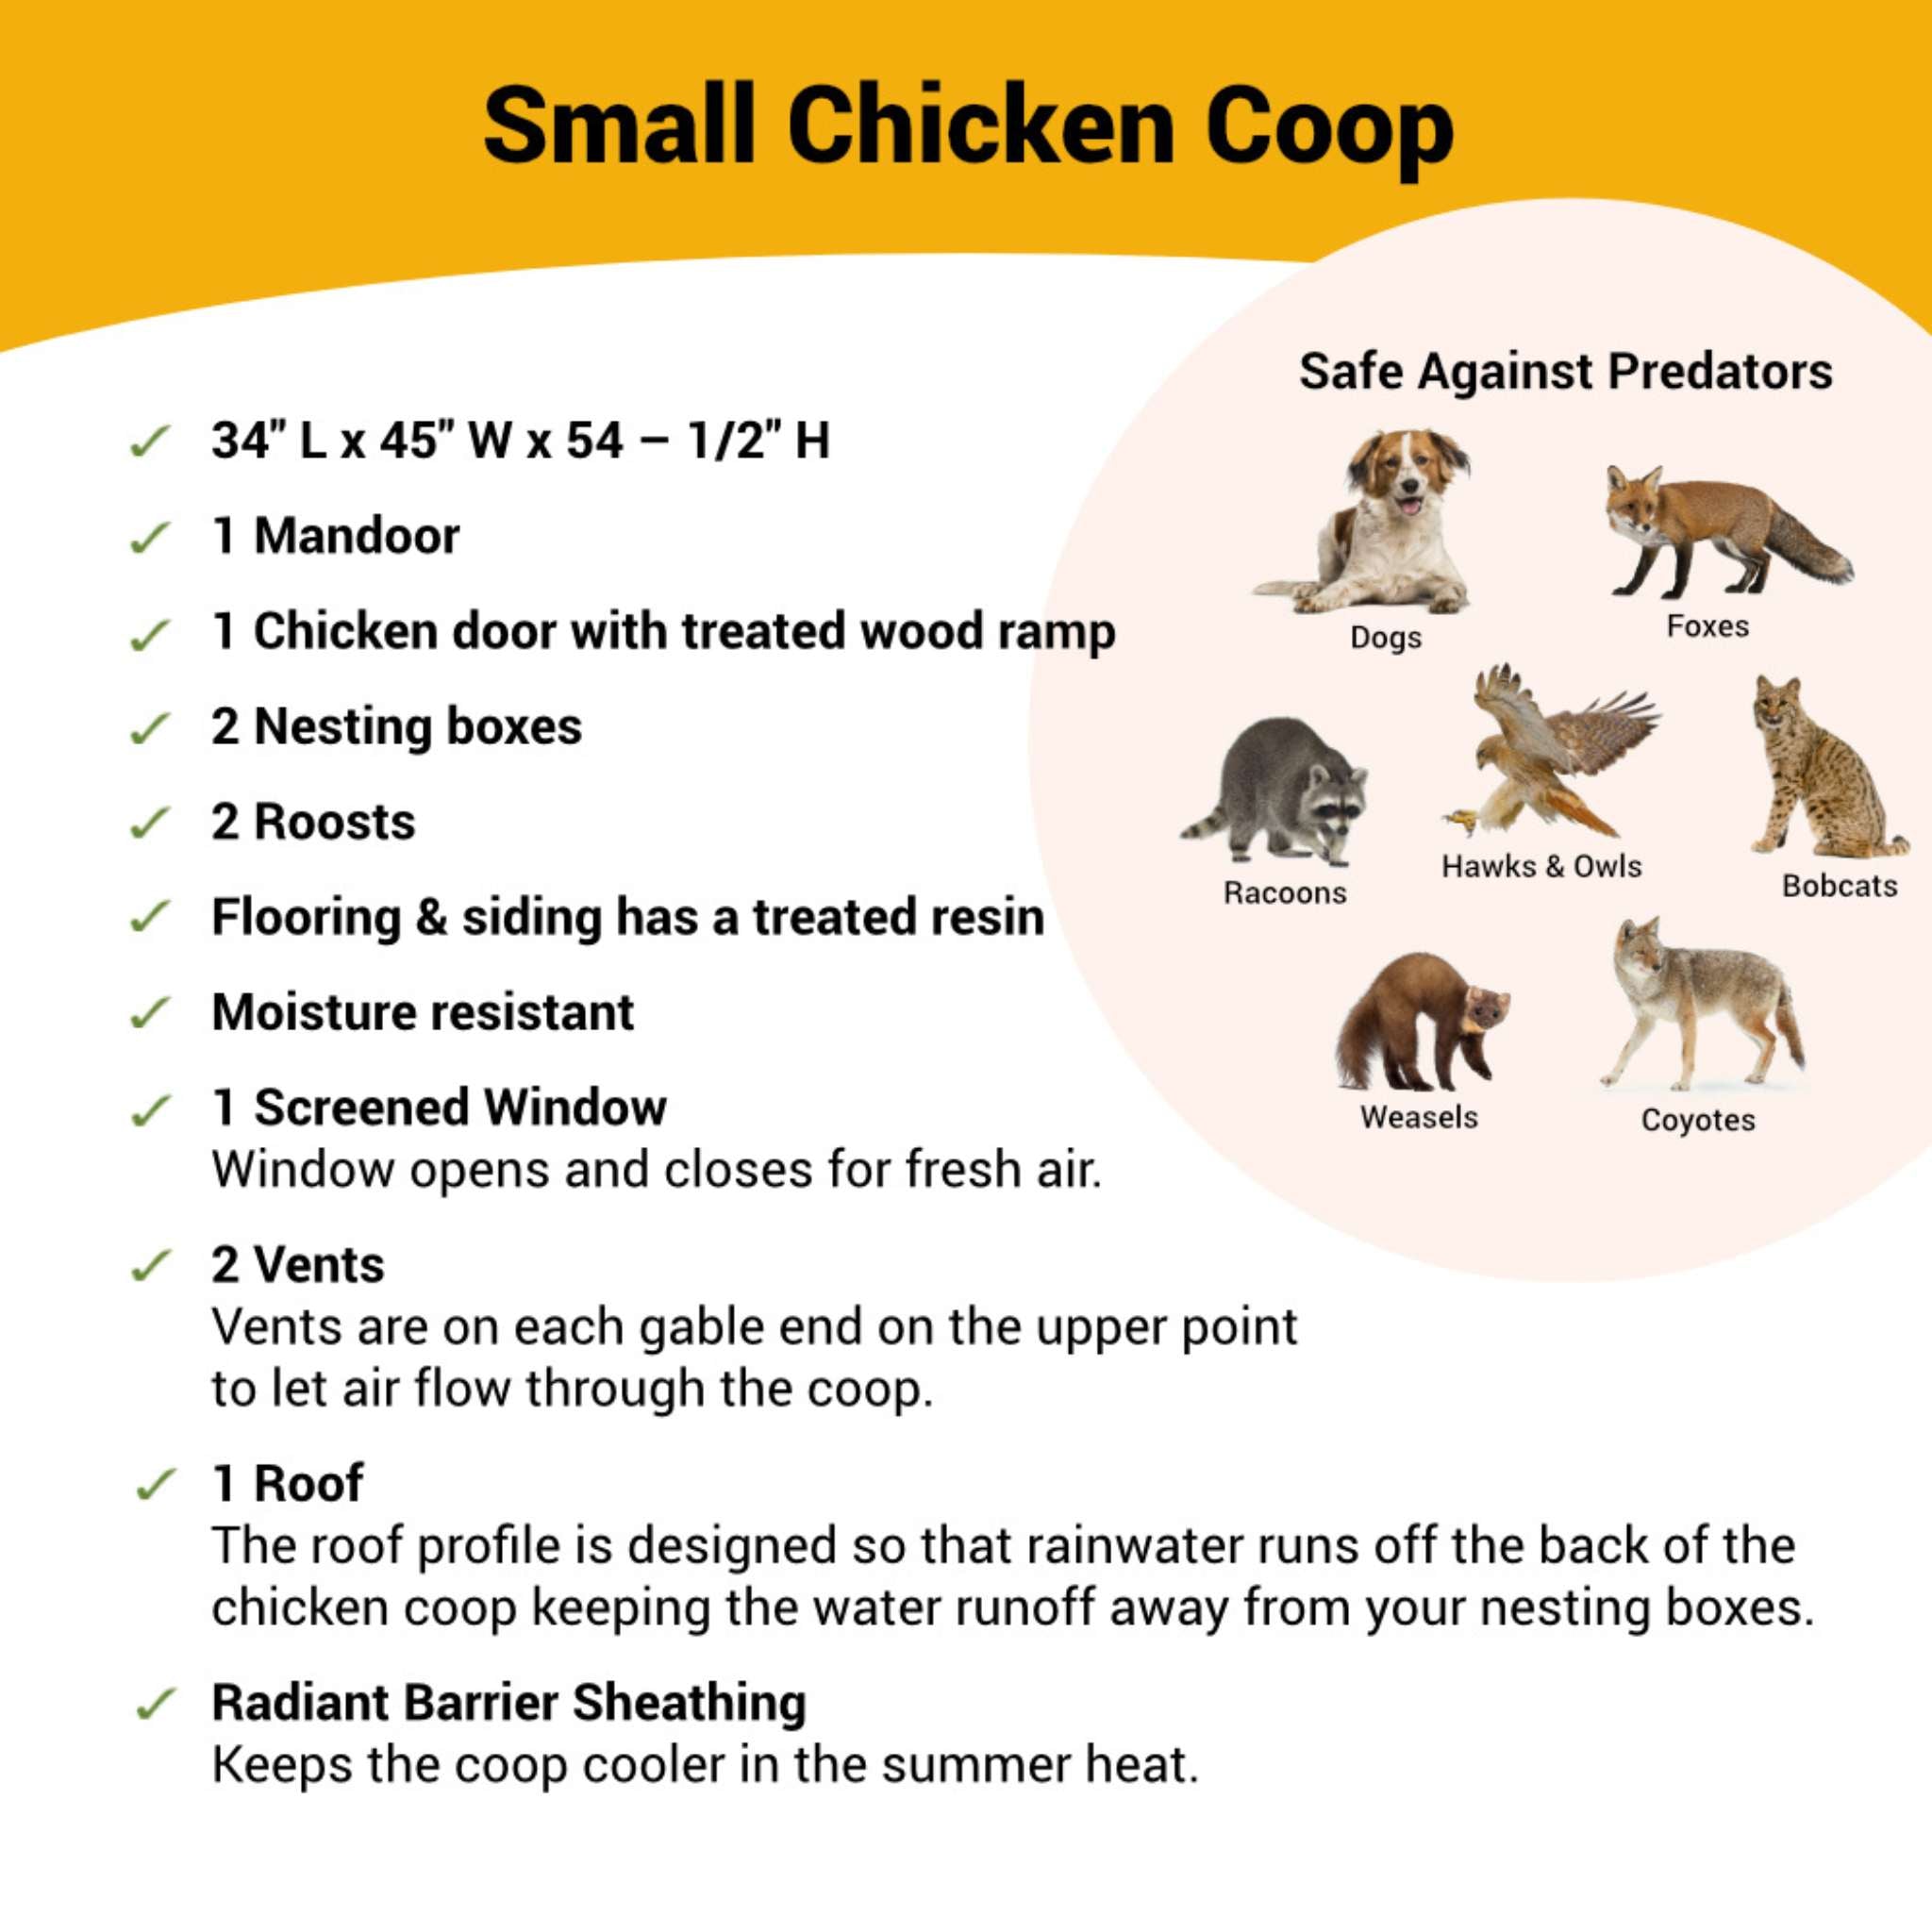 Hatching Time OverEZ Small chicken coop infographic shows coop is safe against predators. dimensions and details are also shown in image for small chicken coop.